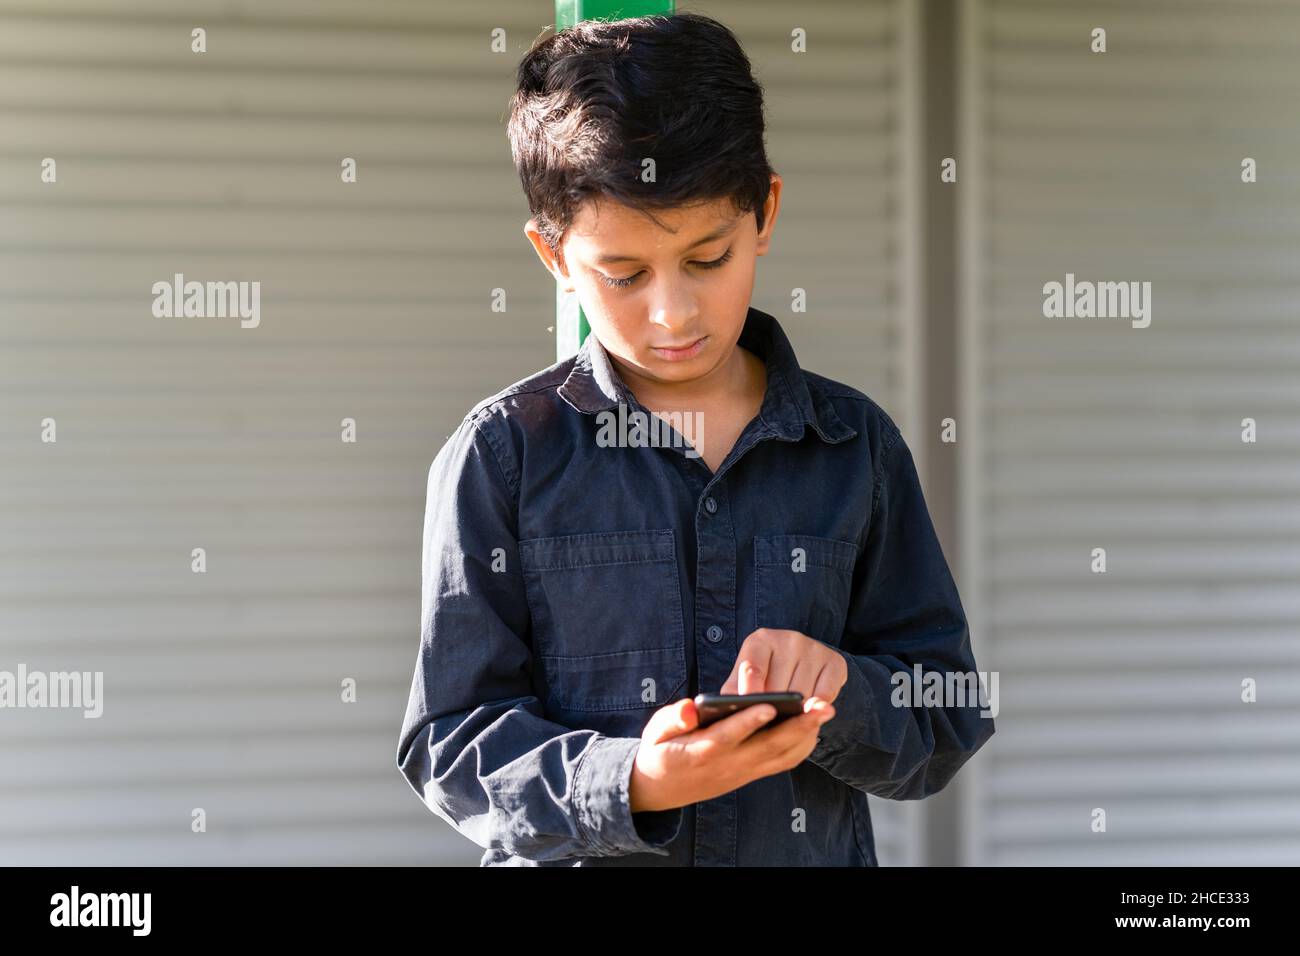 Young boy preteen using mobile phone. Child tapping on cell phone screen. Stock Photo